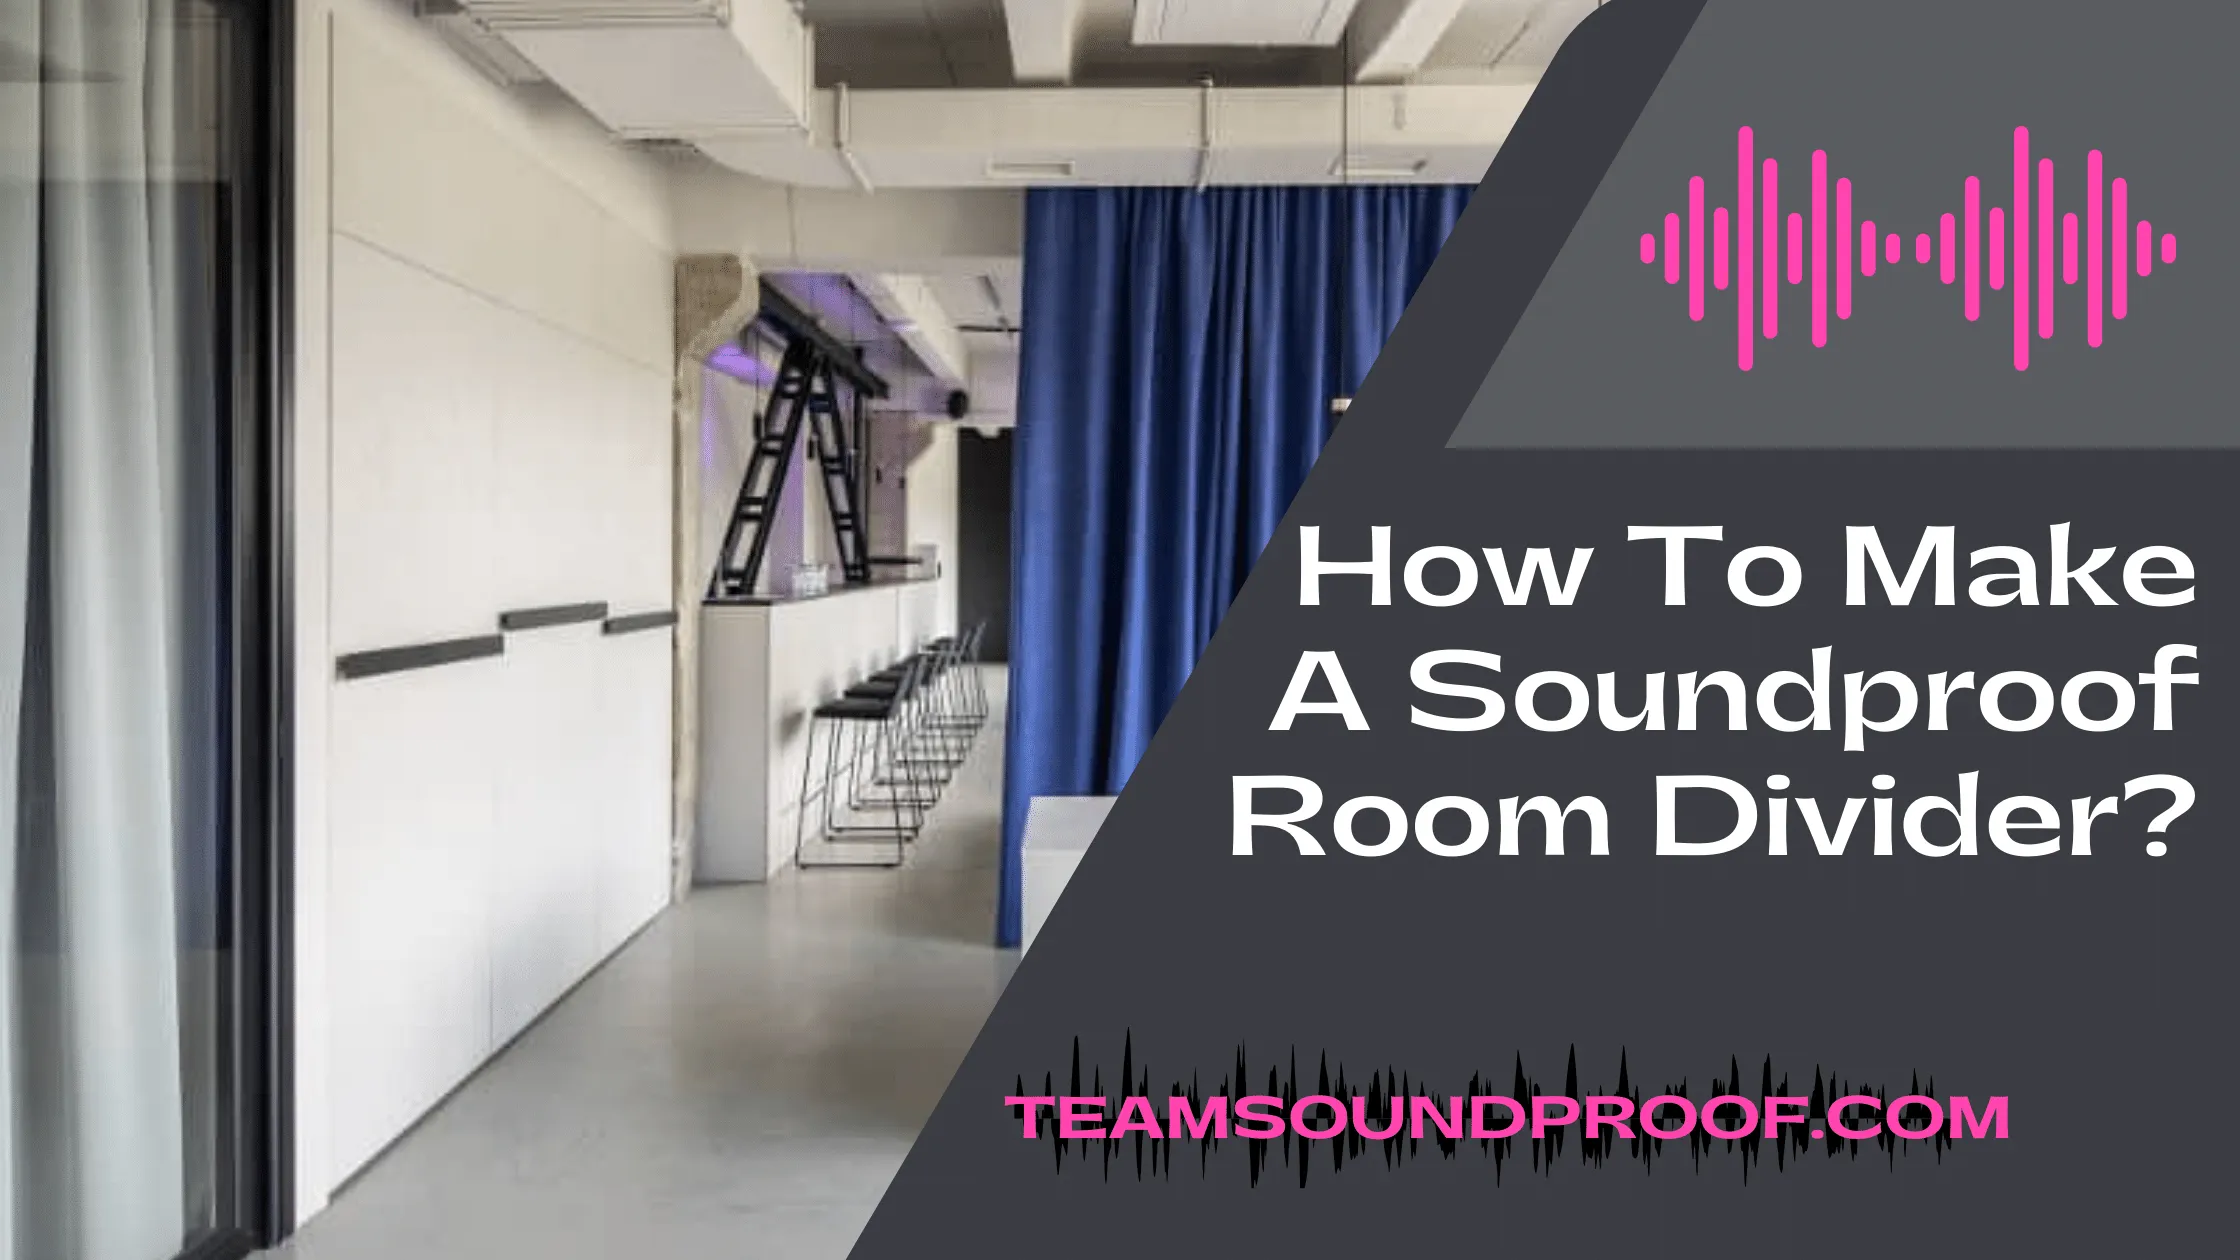 How To Make A Soundproof Room Divider? - #1 Guide